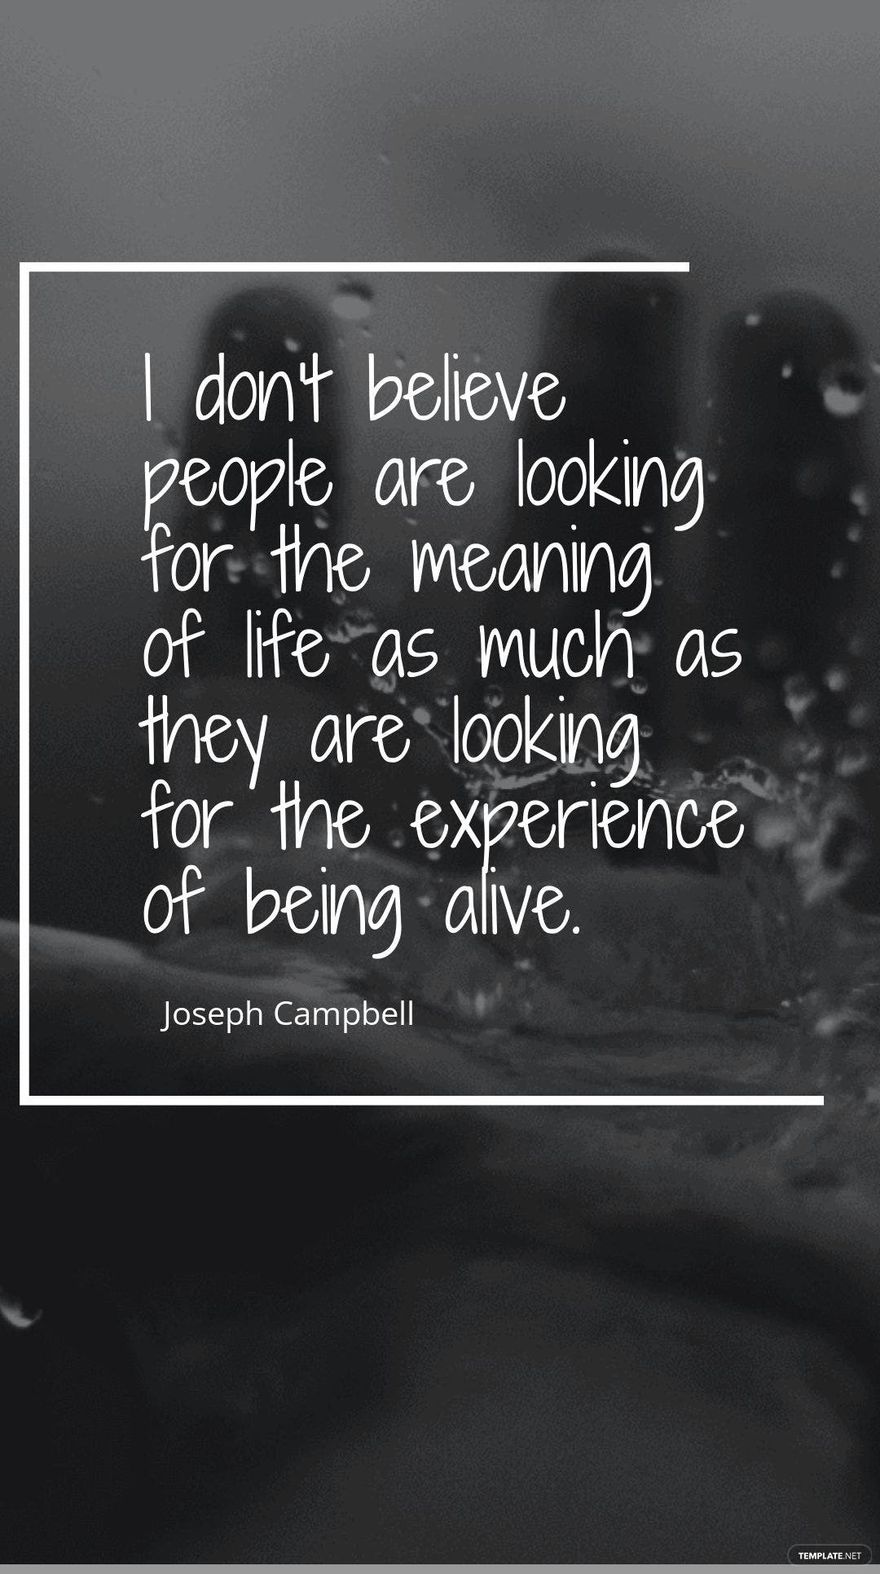 Joseph Campbell - I don't believe people are looking for the meaning of life as much as they are looking for the experience of being alive.